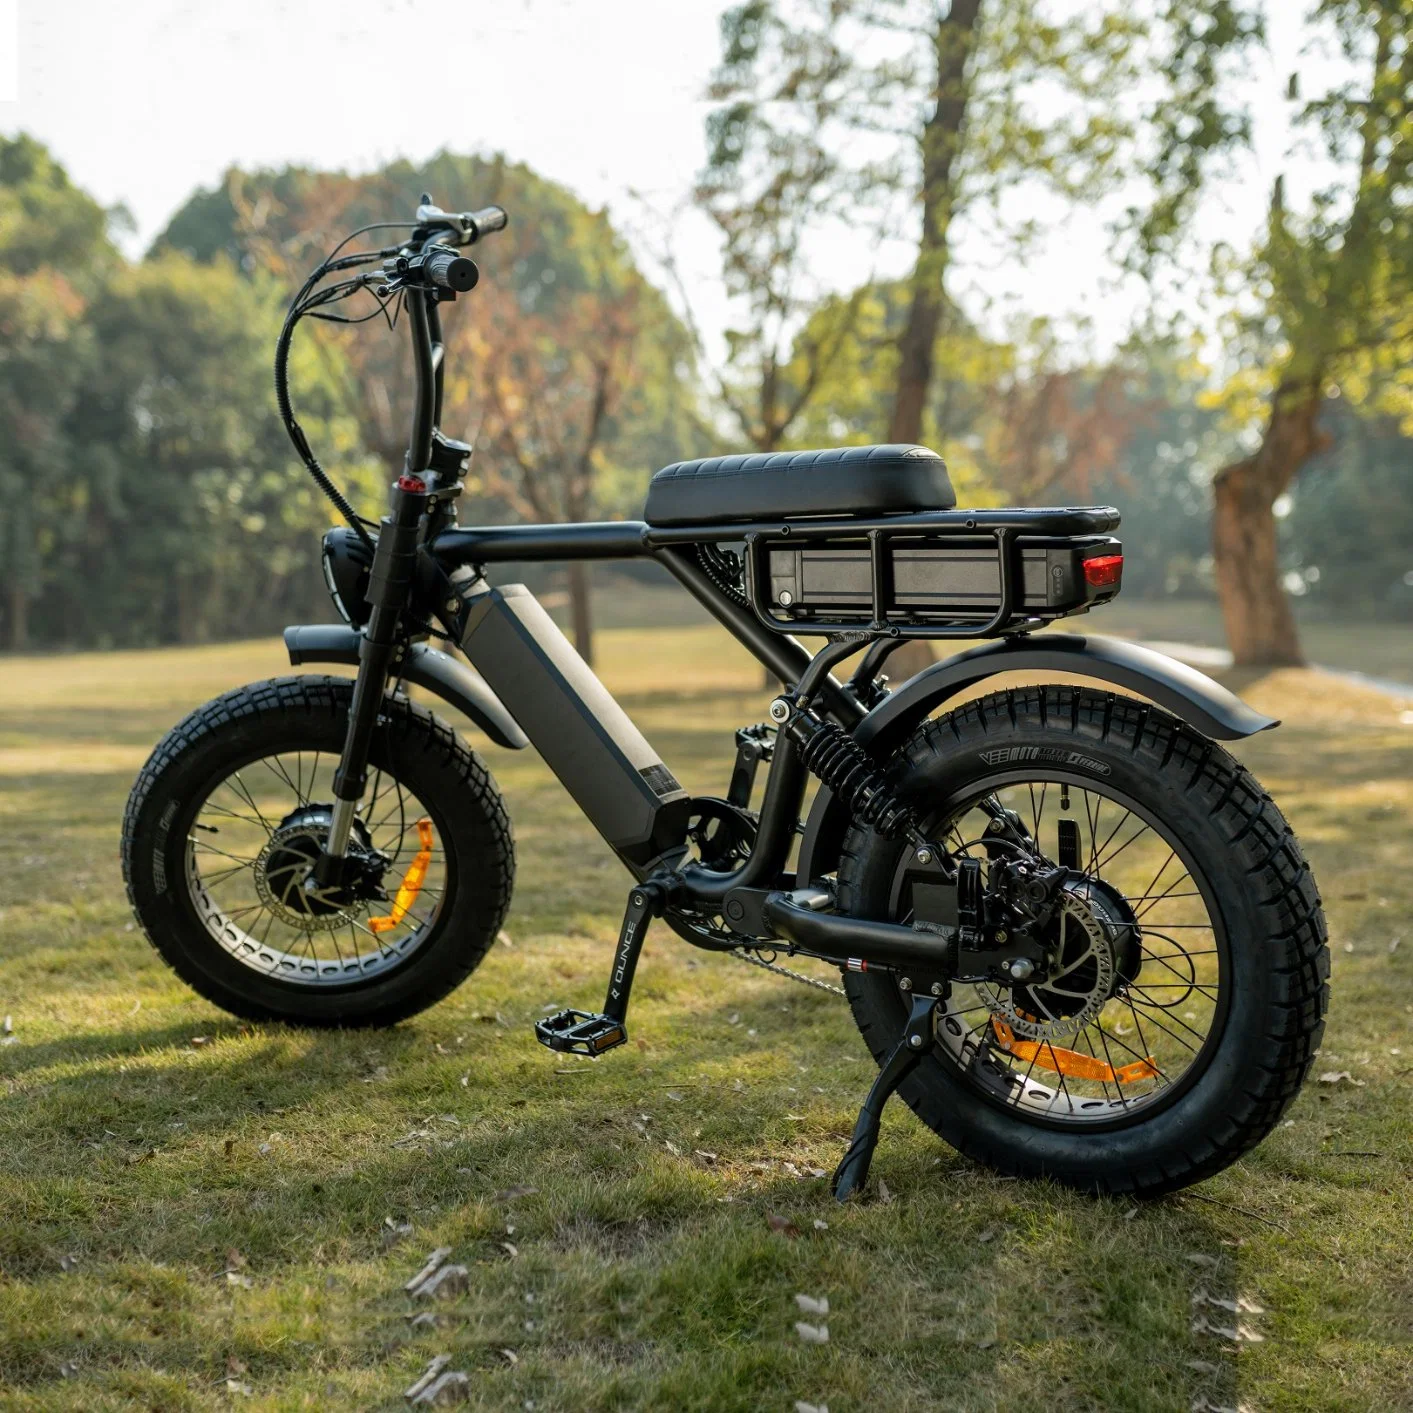 Original Factory Double Battery Full Suspension 1000W Electric Bike